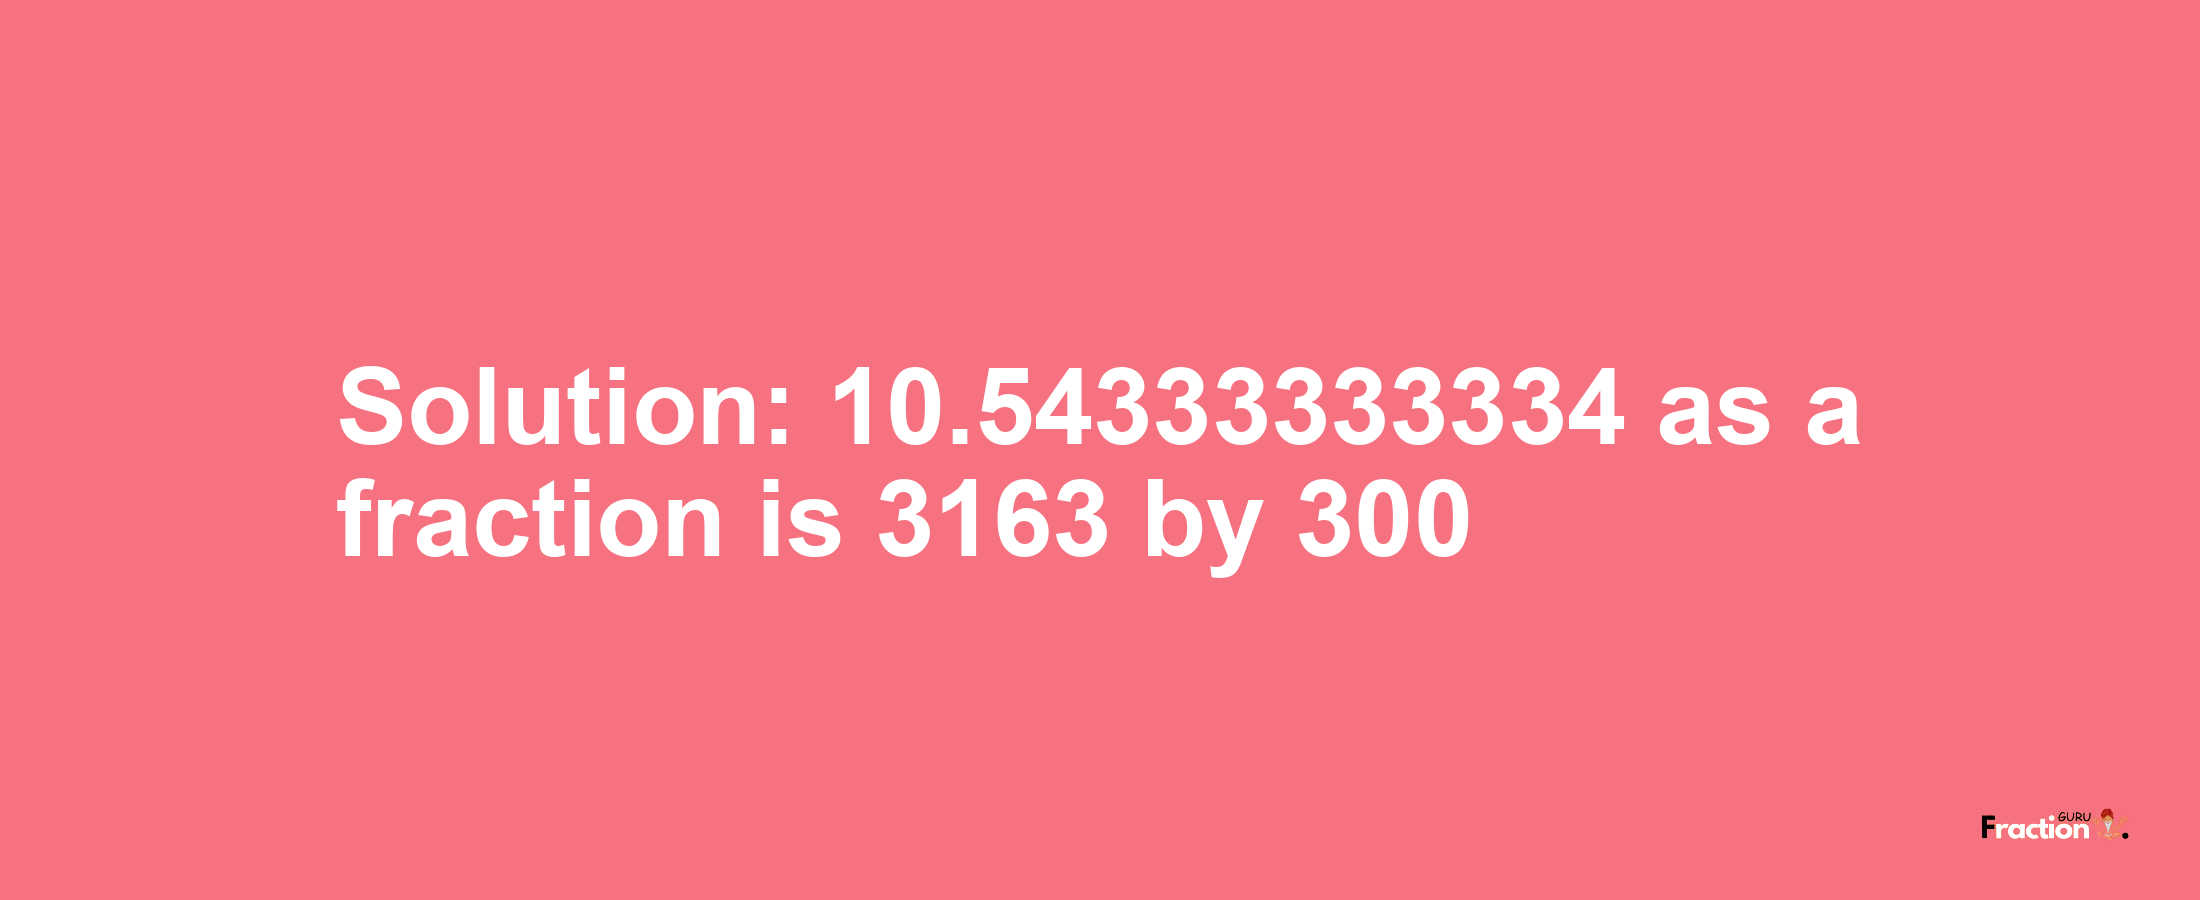 Solution:10.54333333334 as a fraction is 3163/300